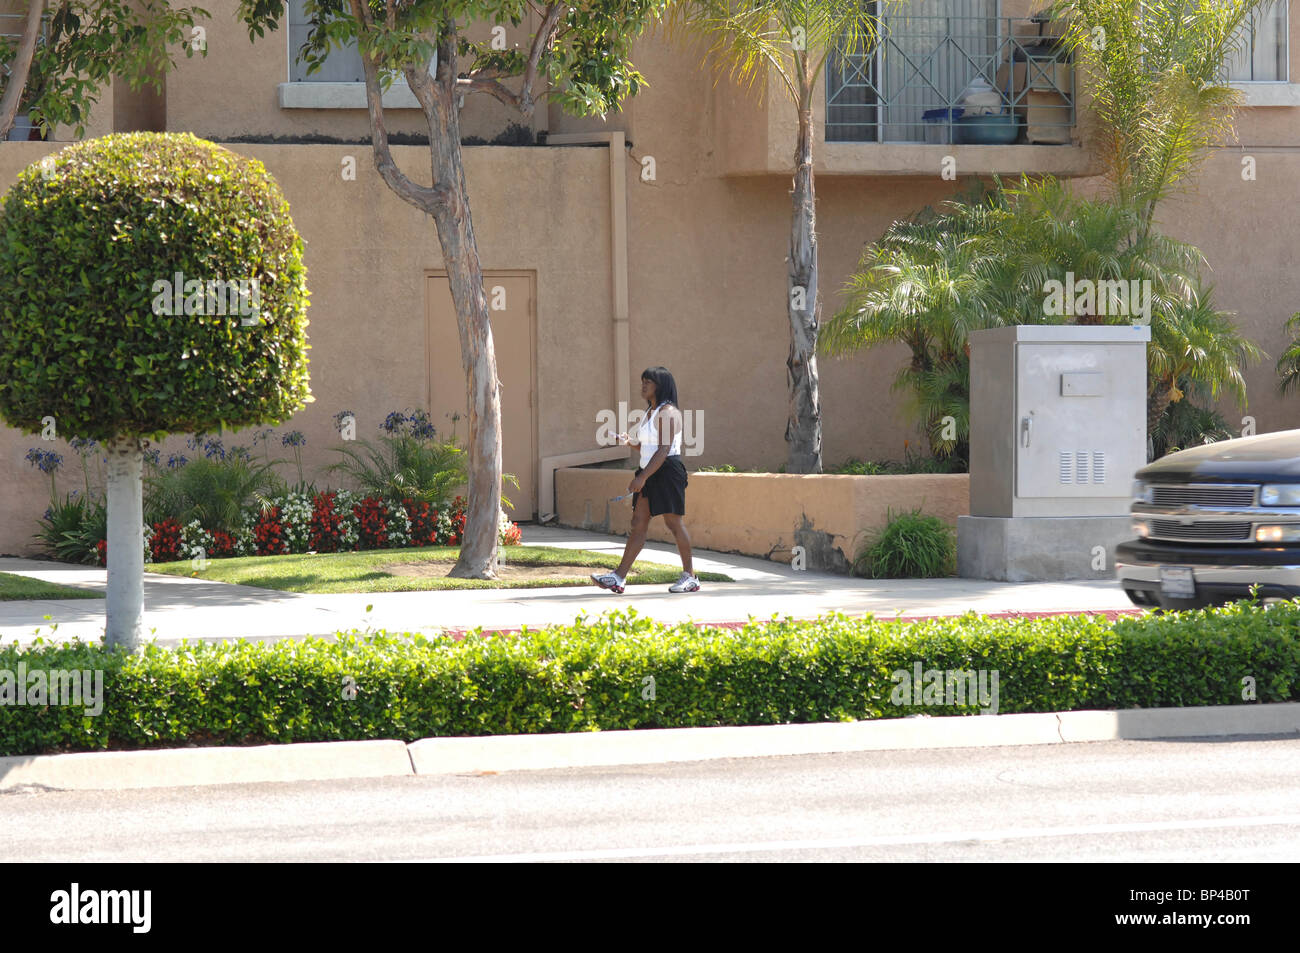 African American Woman walking on the sidewalk wearing athletic clothing. Stock Photo